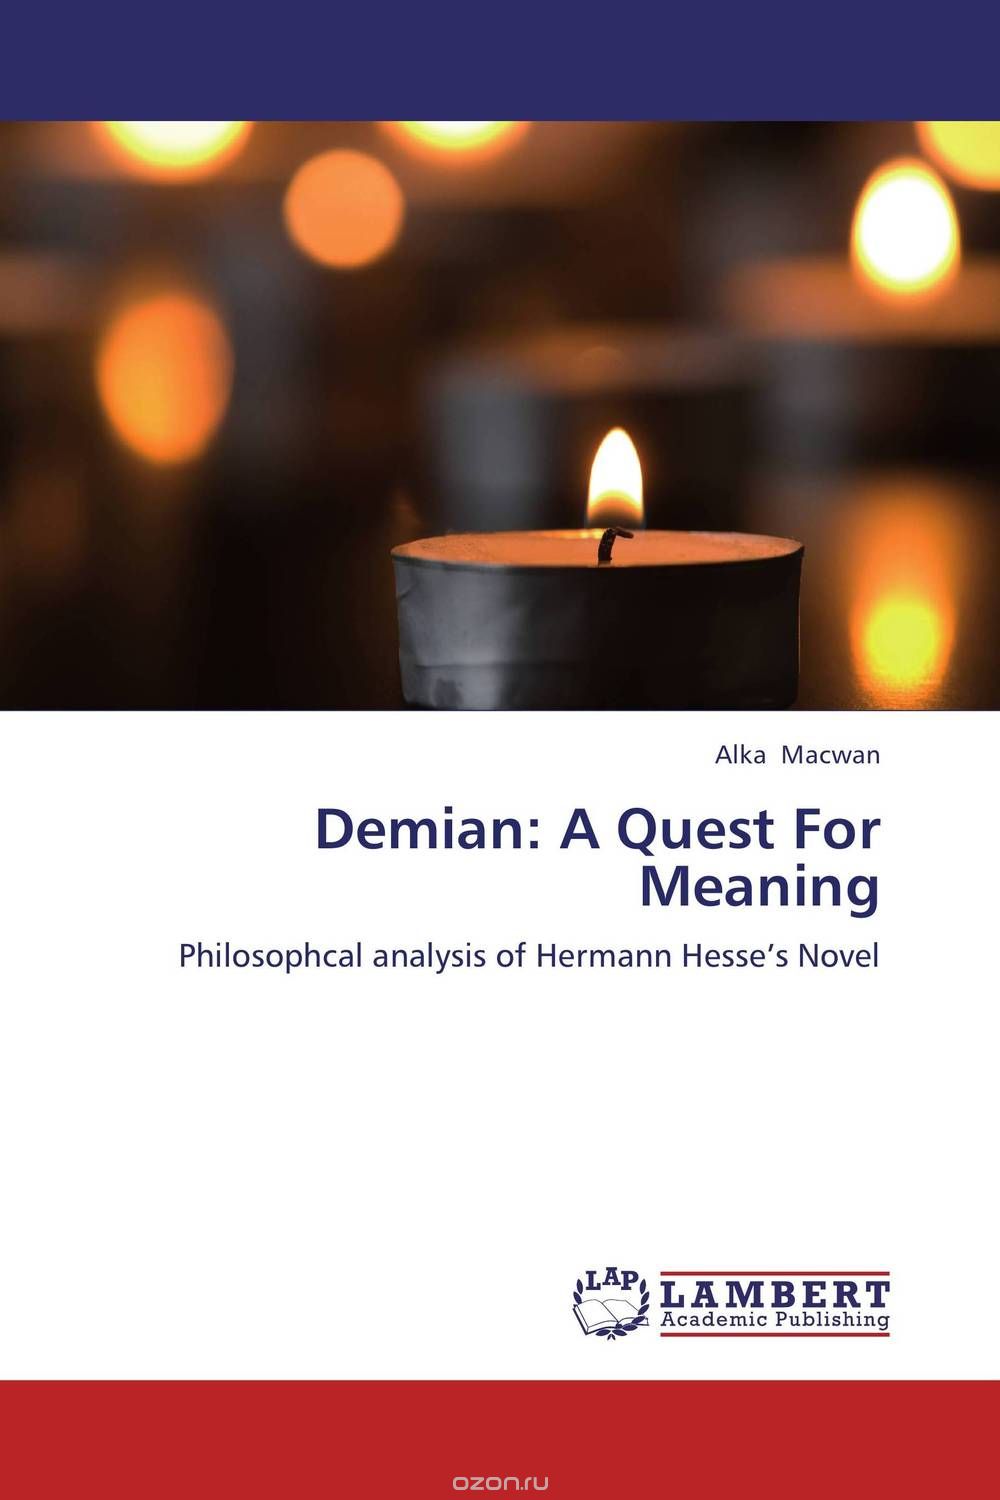 Скачать книгу "Demian: A Quest For Meaning"